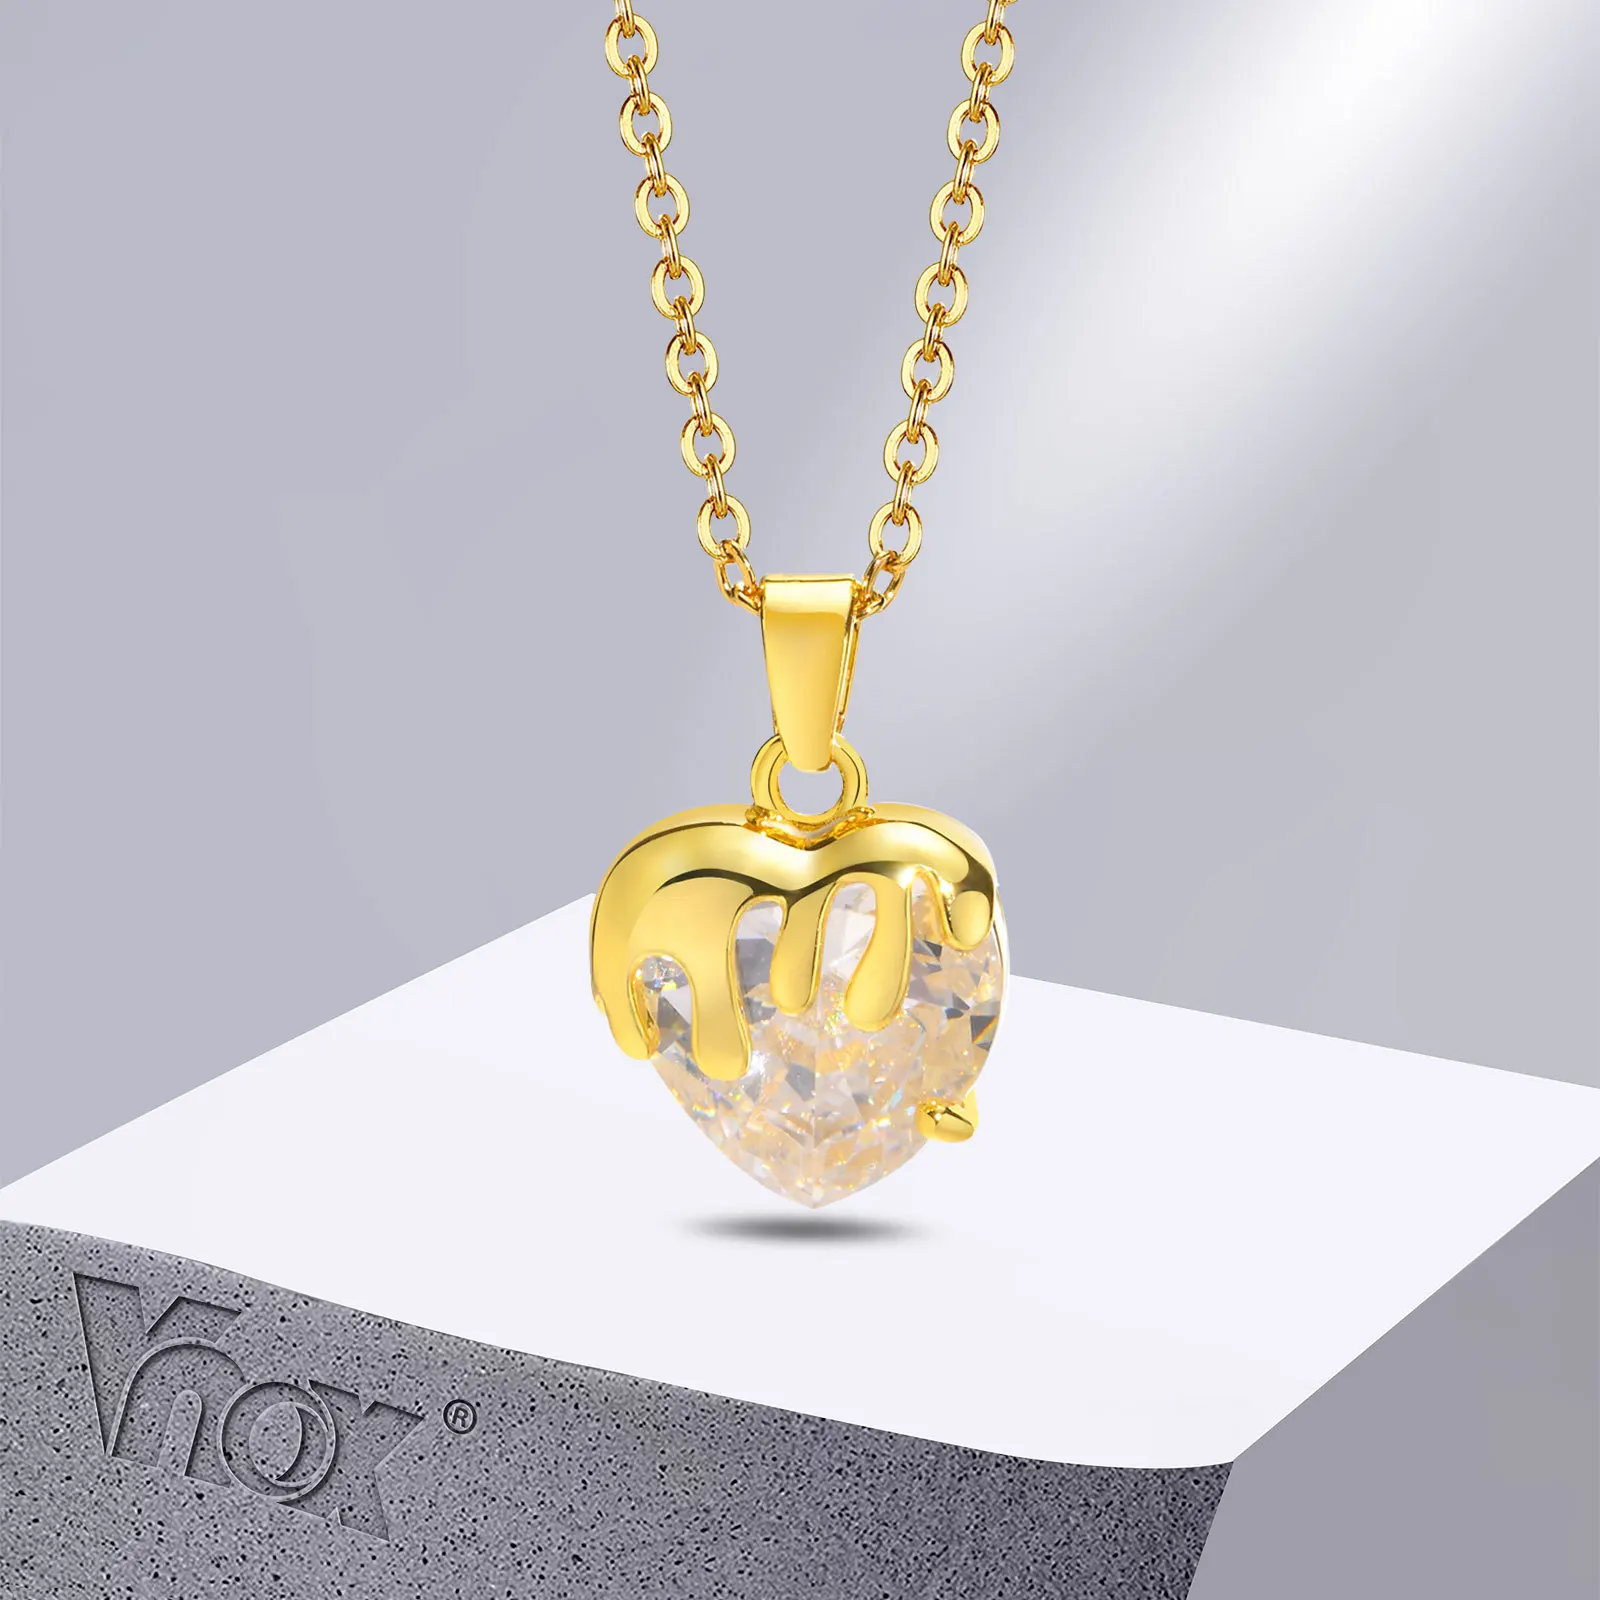 Купи Vnox Glamour Bling CZ Stone Heart Necklaces for Women Lady Mom Gift Jewelry, Gold Color Stainless Steel Love Promise Collar за 173 рублей в магазине AliExpress